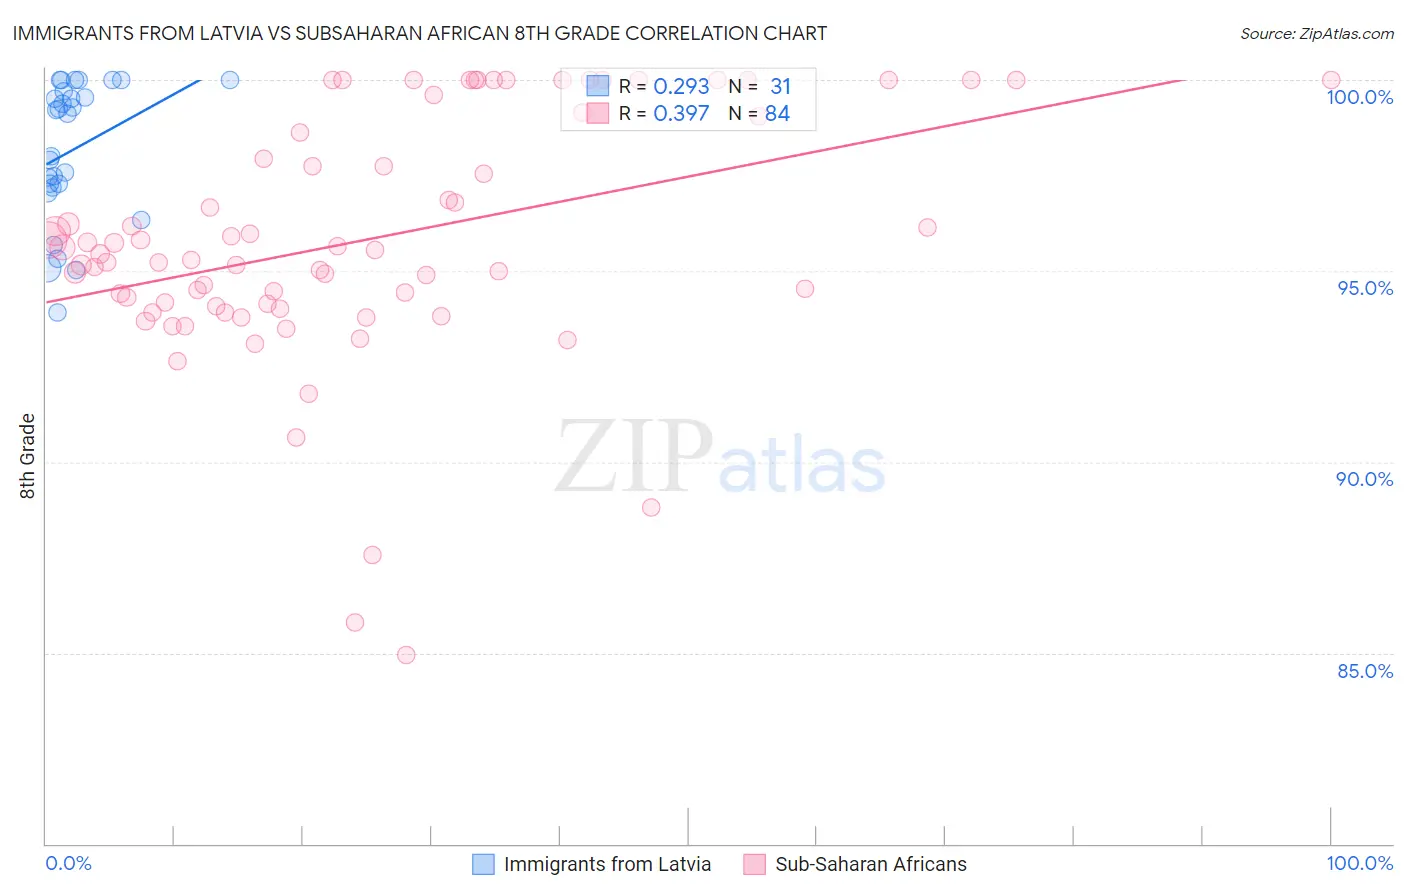 Immigrants from Latvia vs Subsaharan African 8th Grade